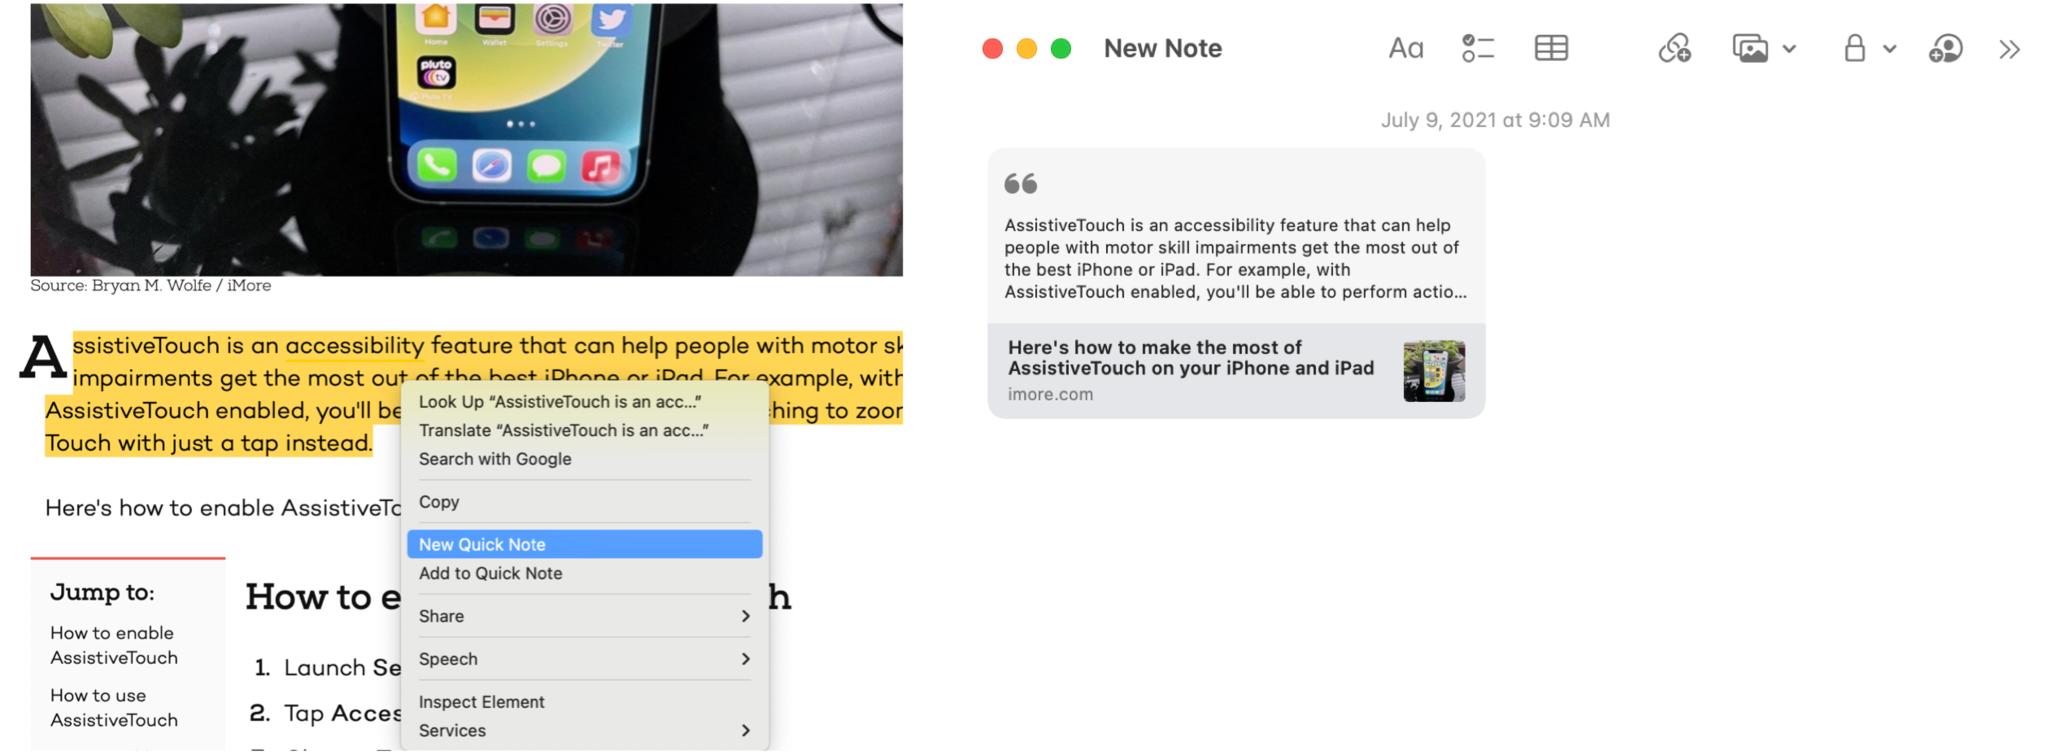 To add a Safari highlight to a Quick Note, go into Safari and copy the text you wish to highlight. Right-click then choose New Quick Note or Add to Quick Note